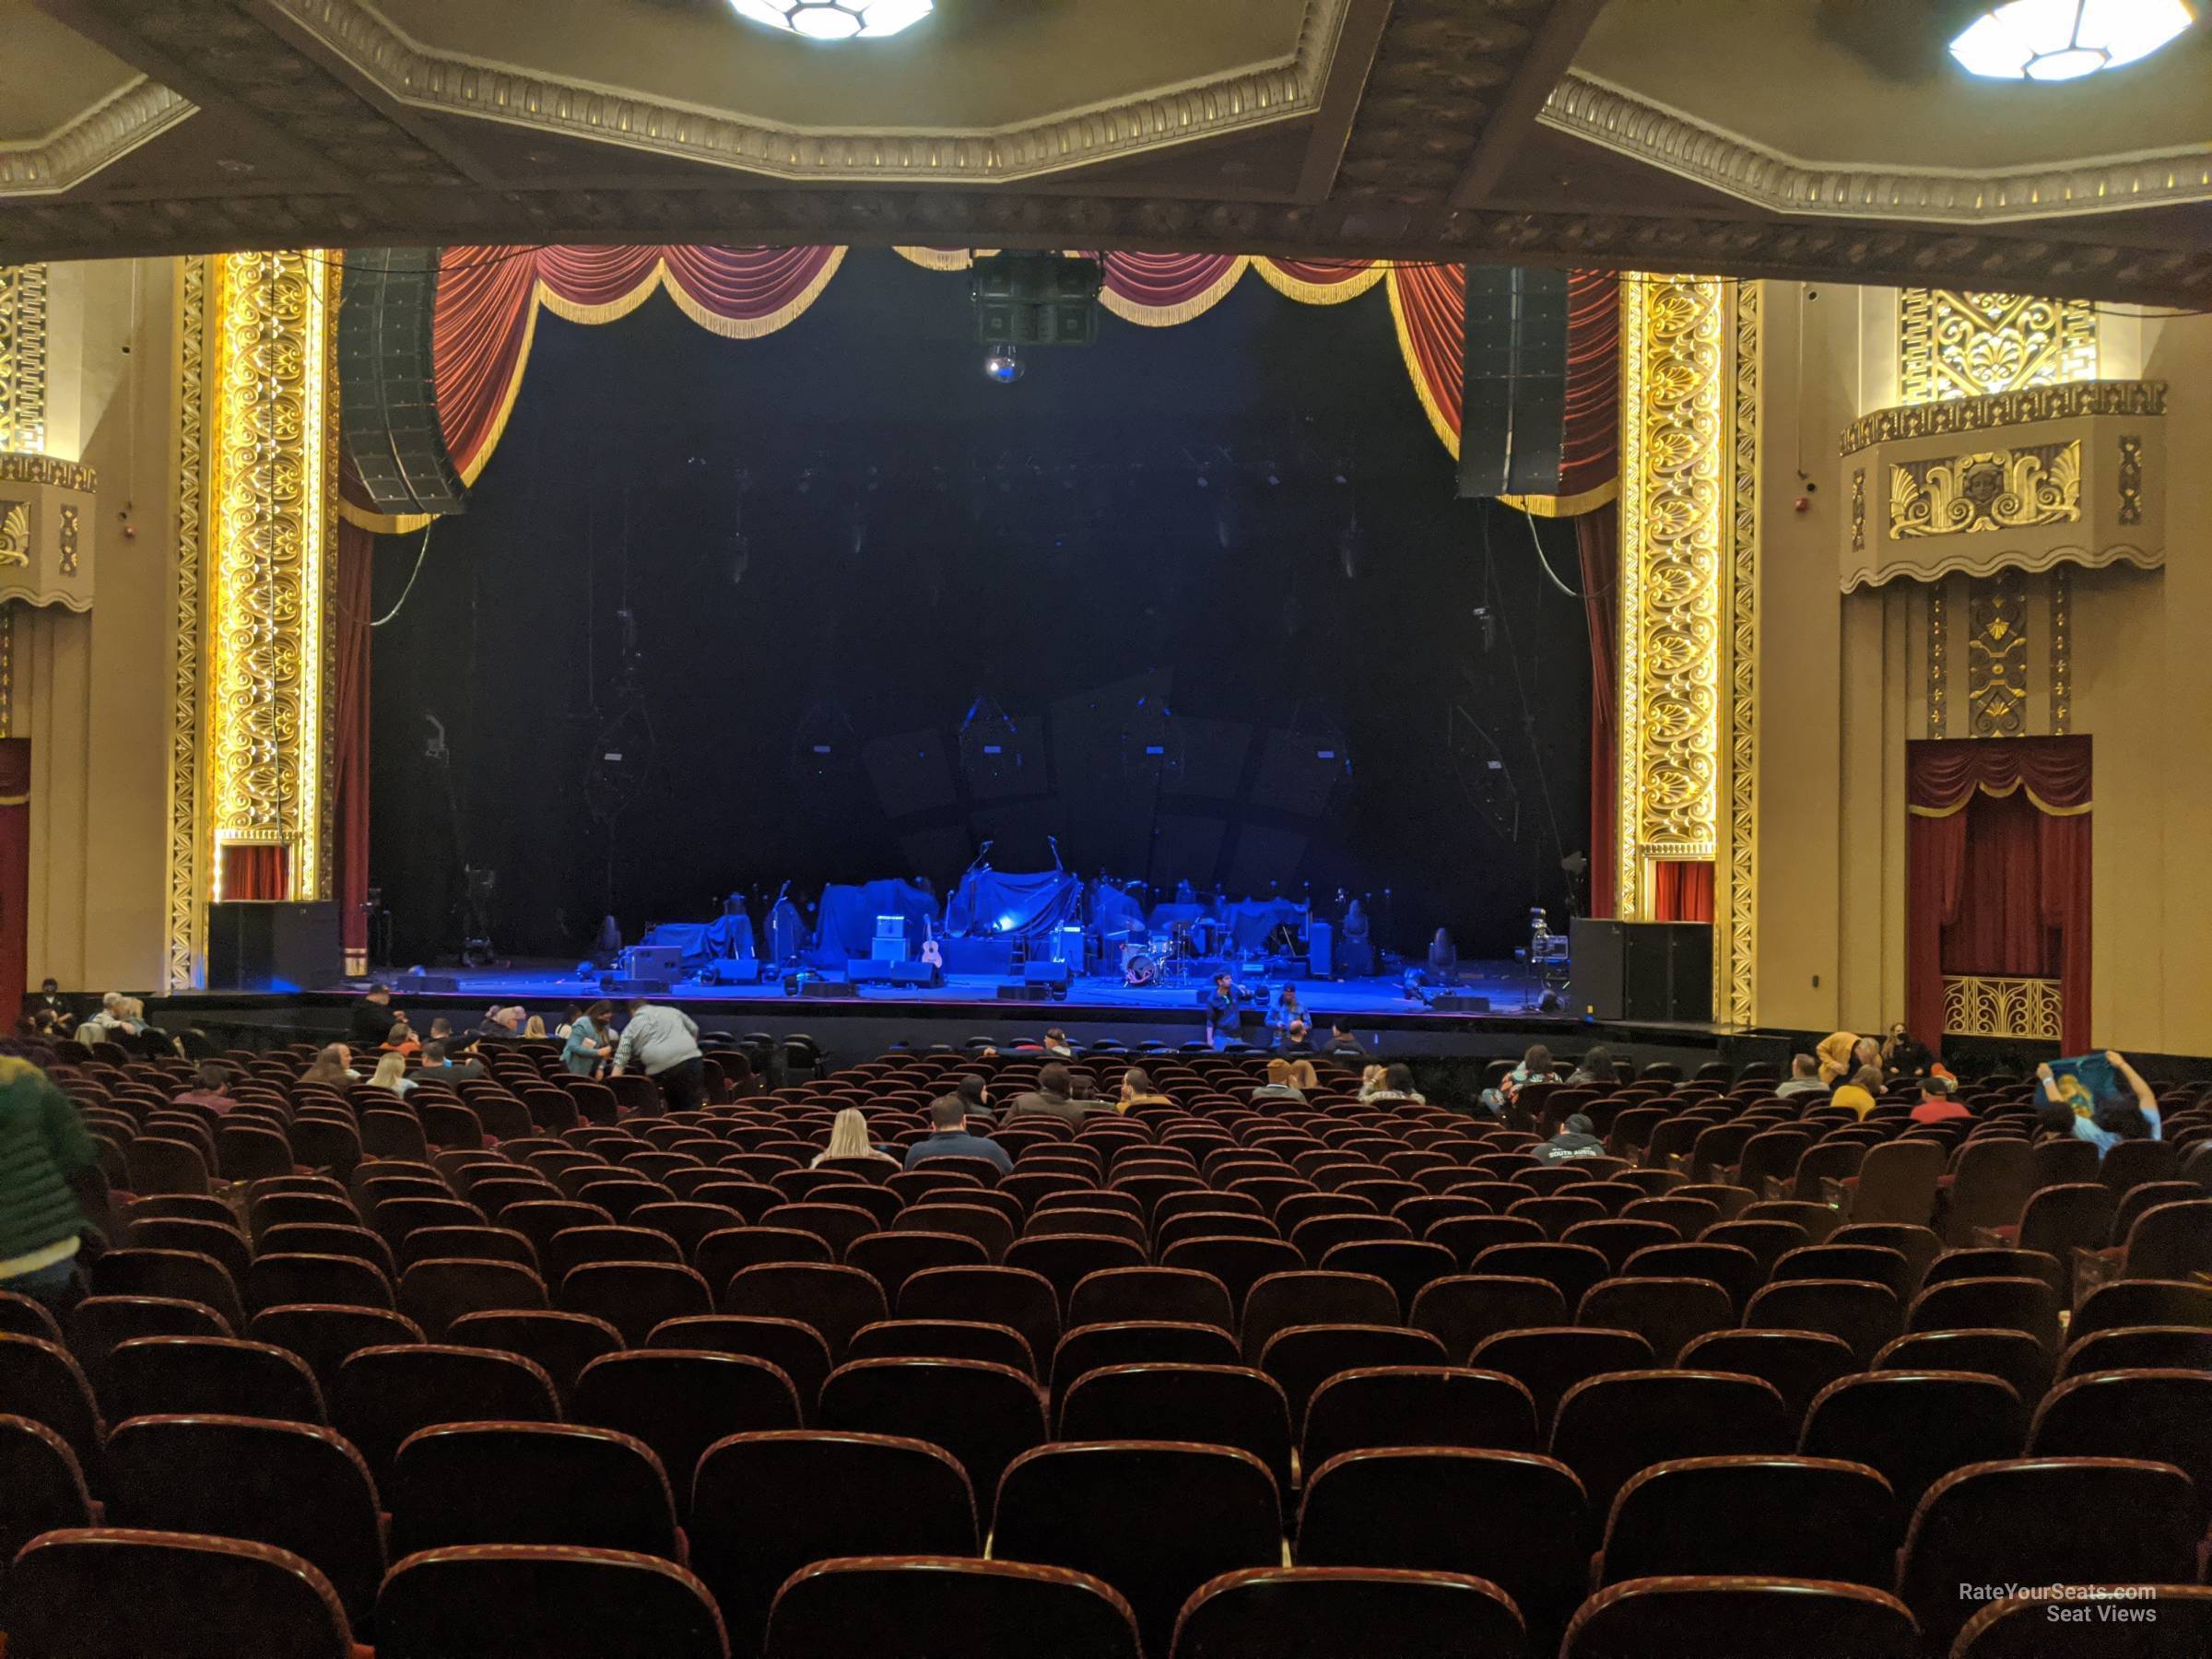 orchestra right center, row aa seat view  - stifel theatre